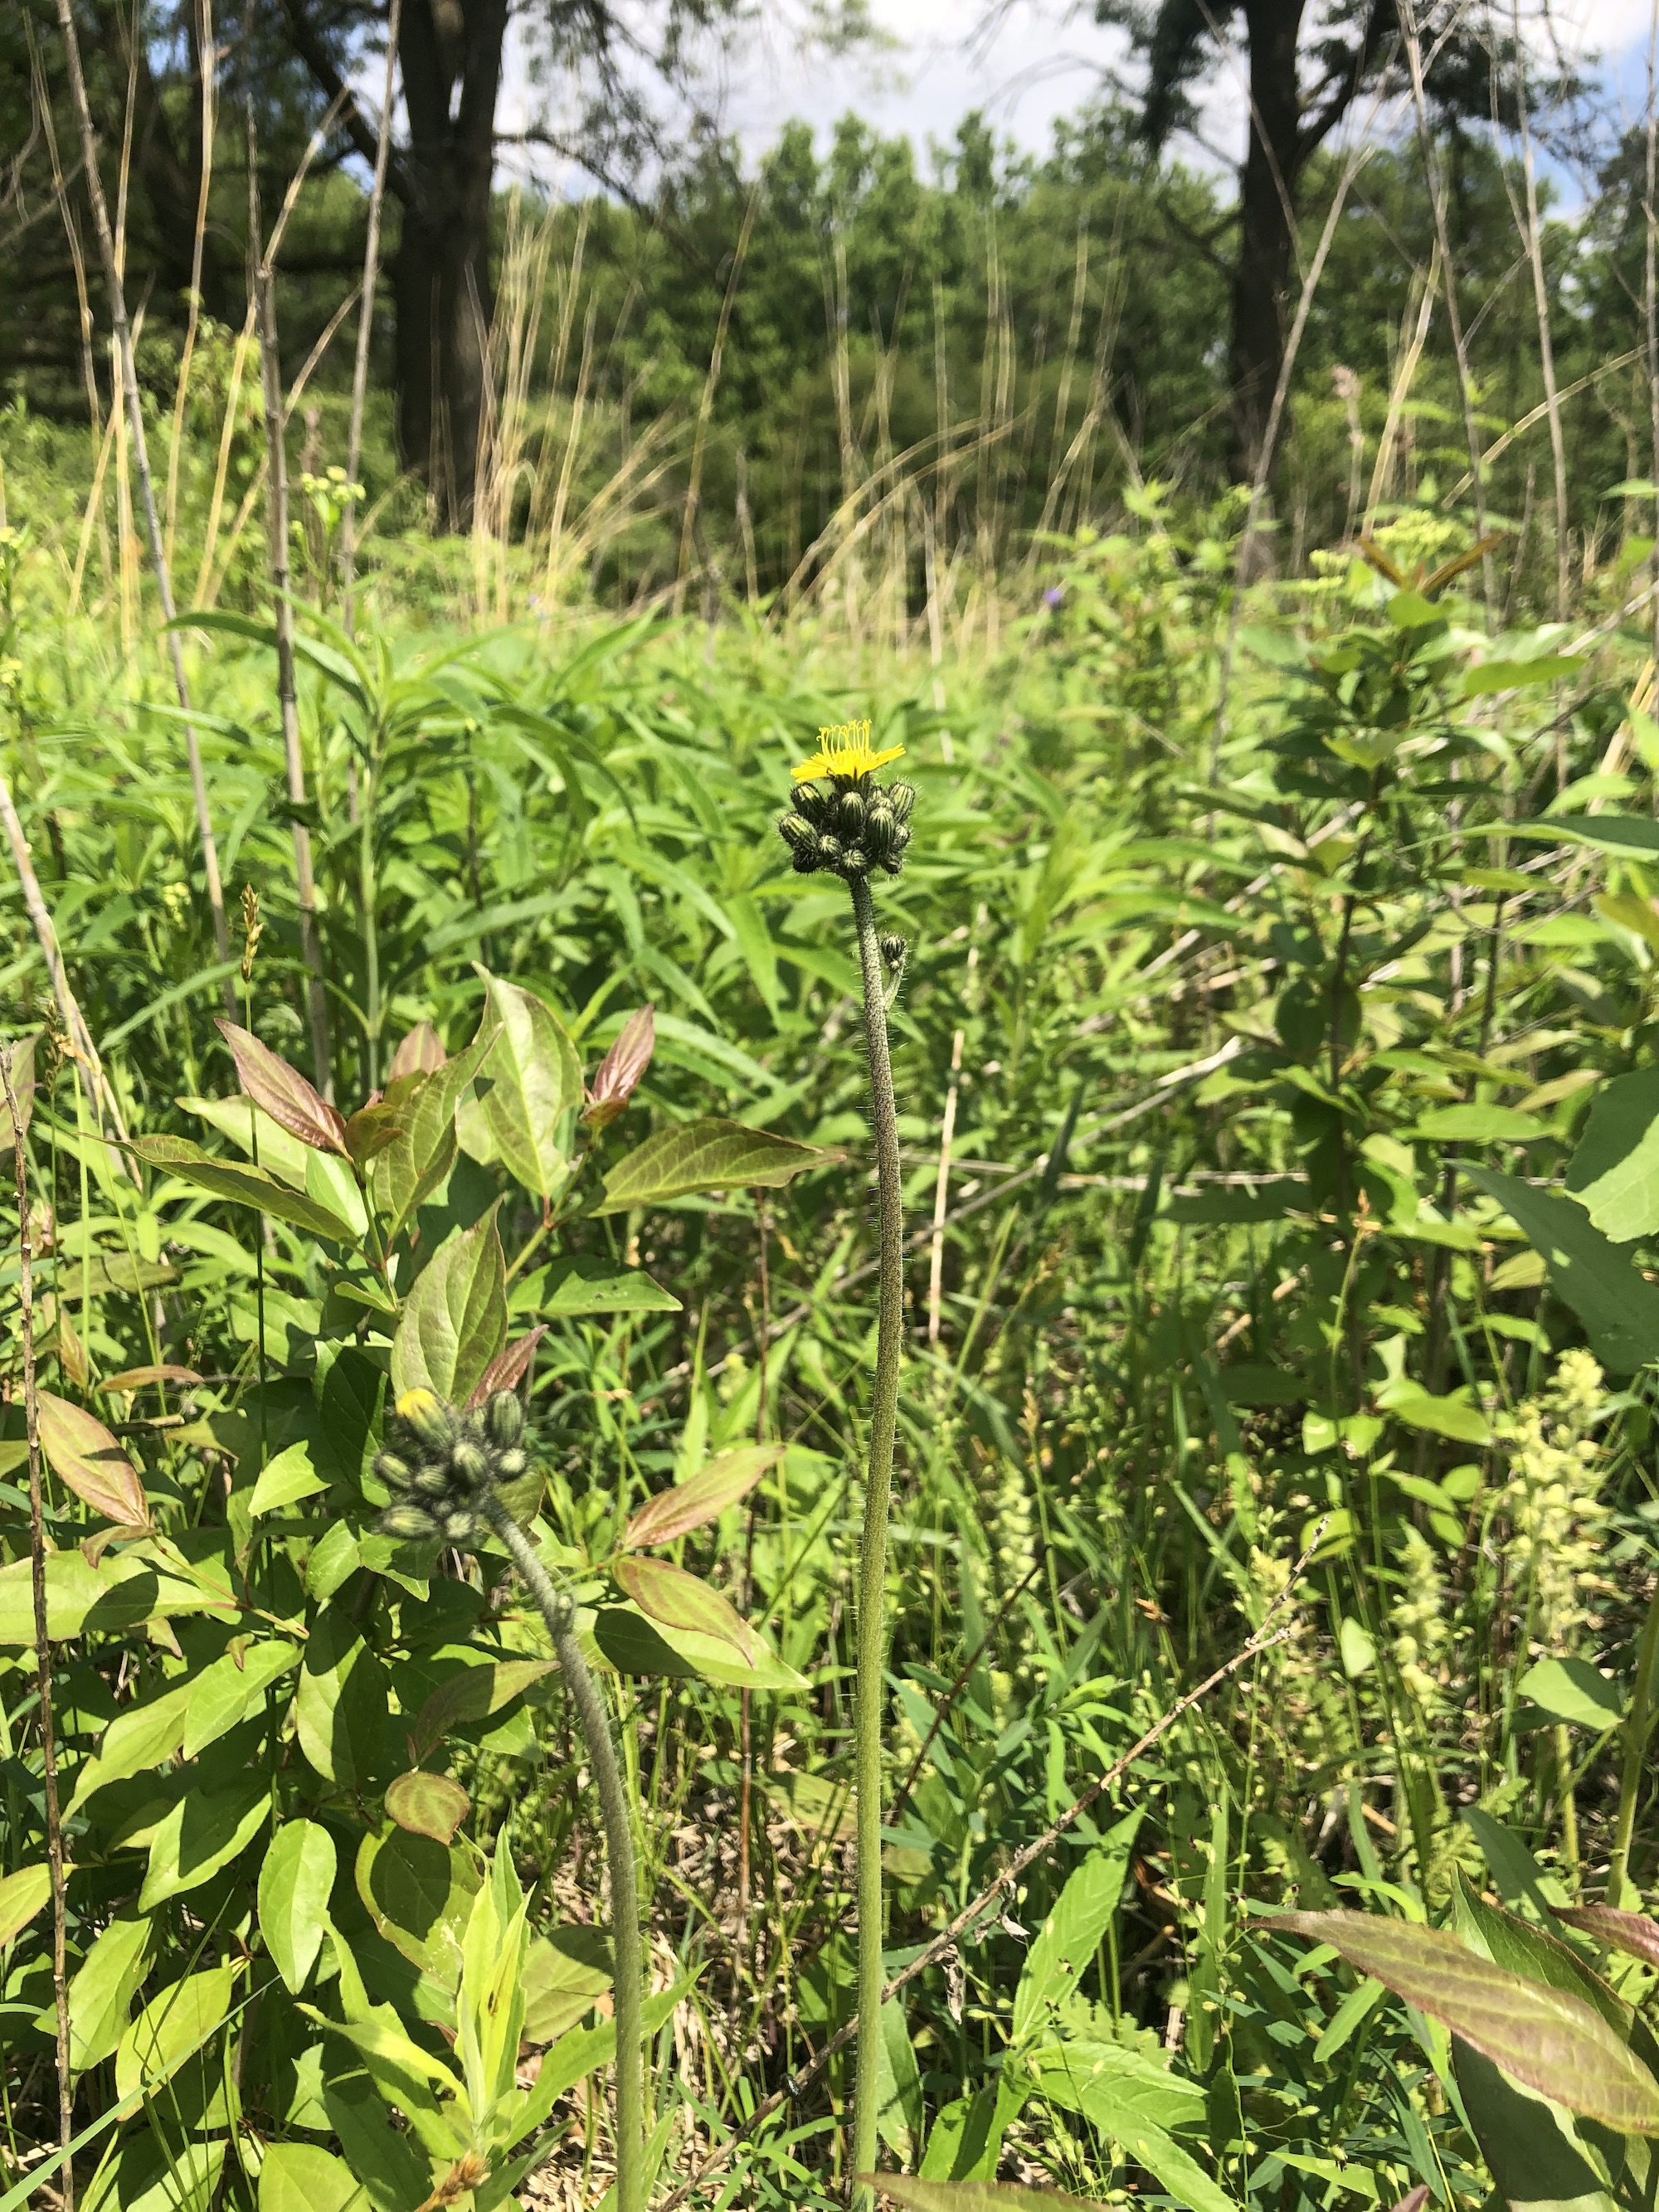 Meadow Hawkweed in the Curtis Prairie in the University of Wisconsin-Madison Arboretum in Madison, Wisconsin on June 7, 2022.